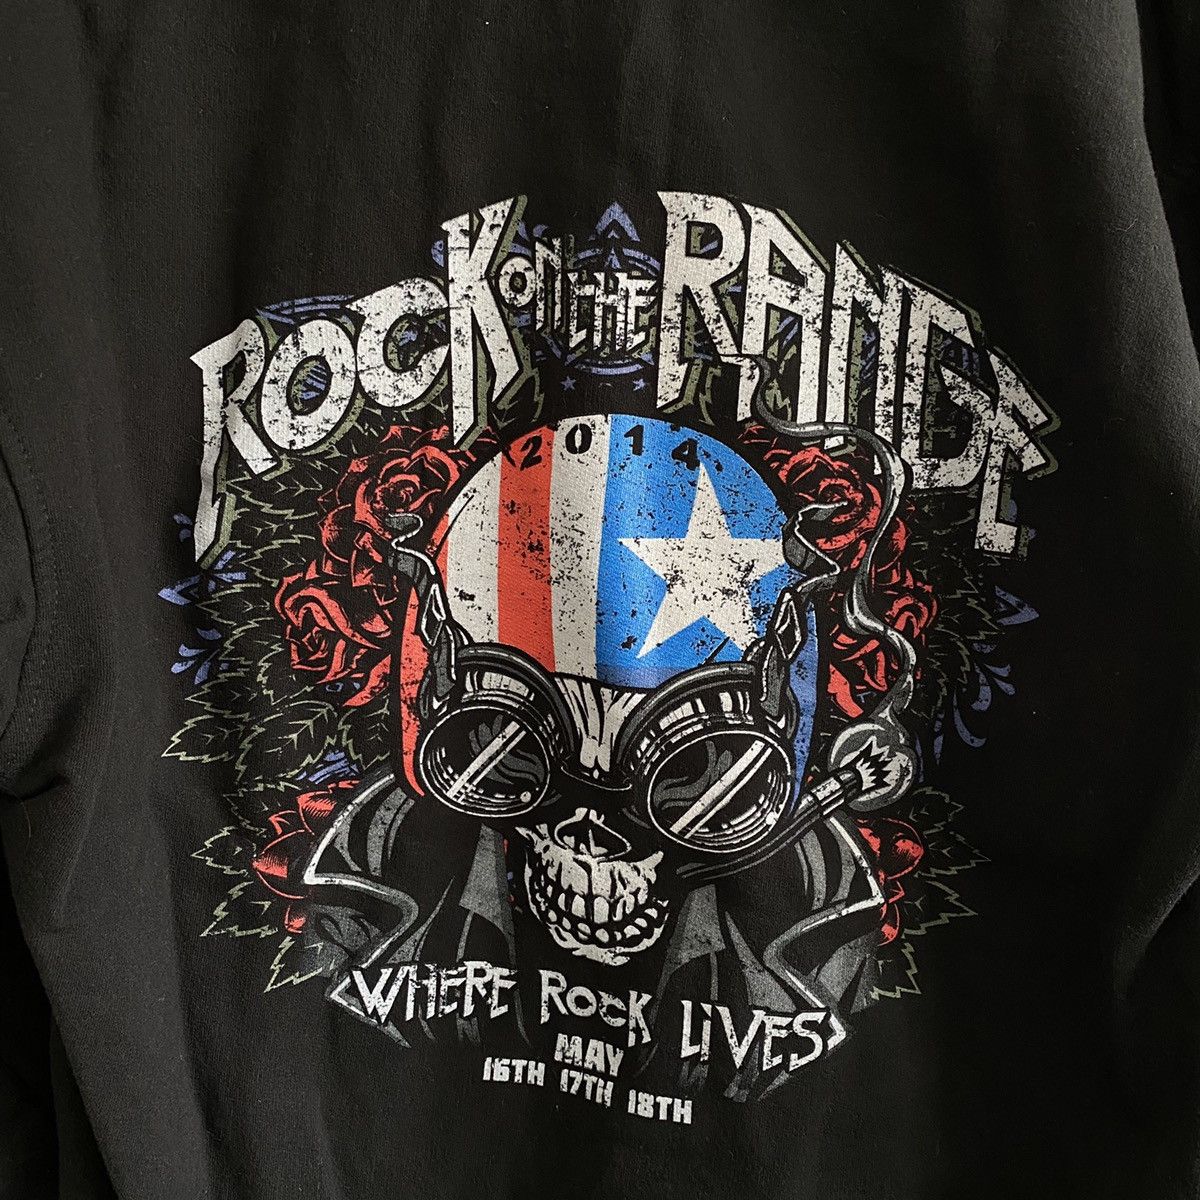 Band Tees Rock on the Range Festival Hoodie Size US M / EU 48-50 / 2 - 5 Preview